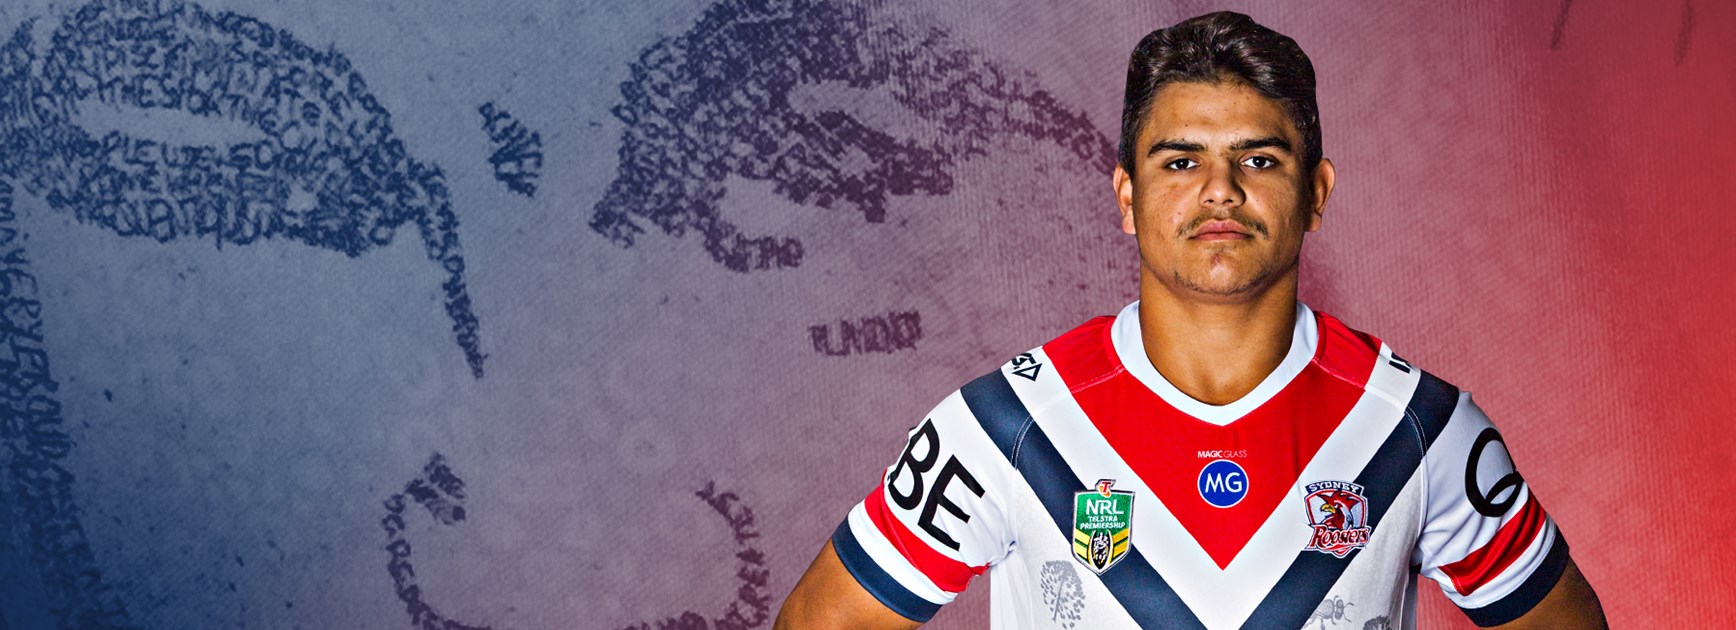 Sydney Roosters 2018 Indigenous Jersey